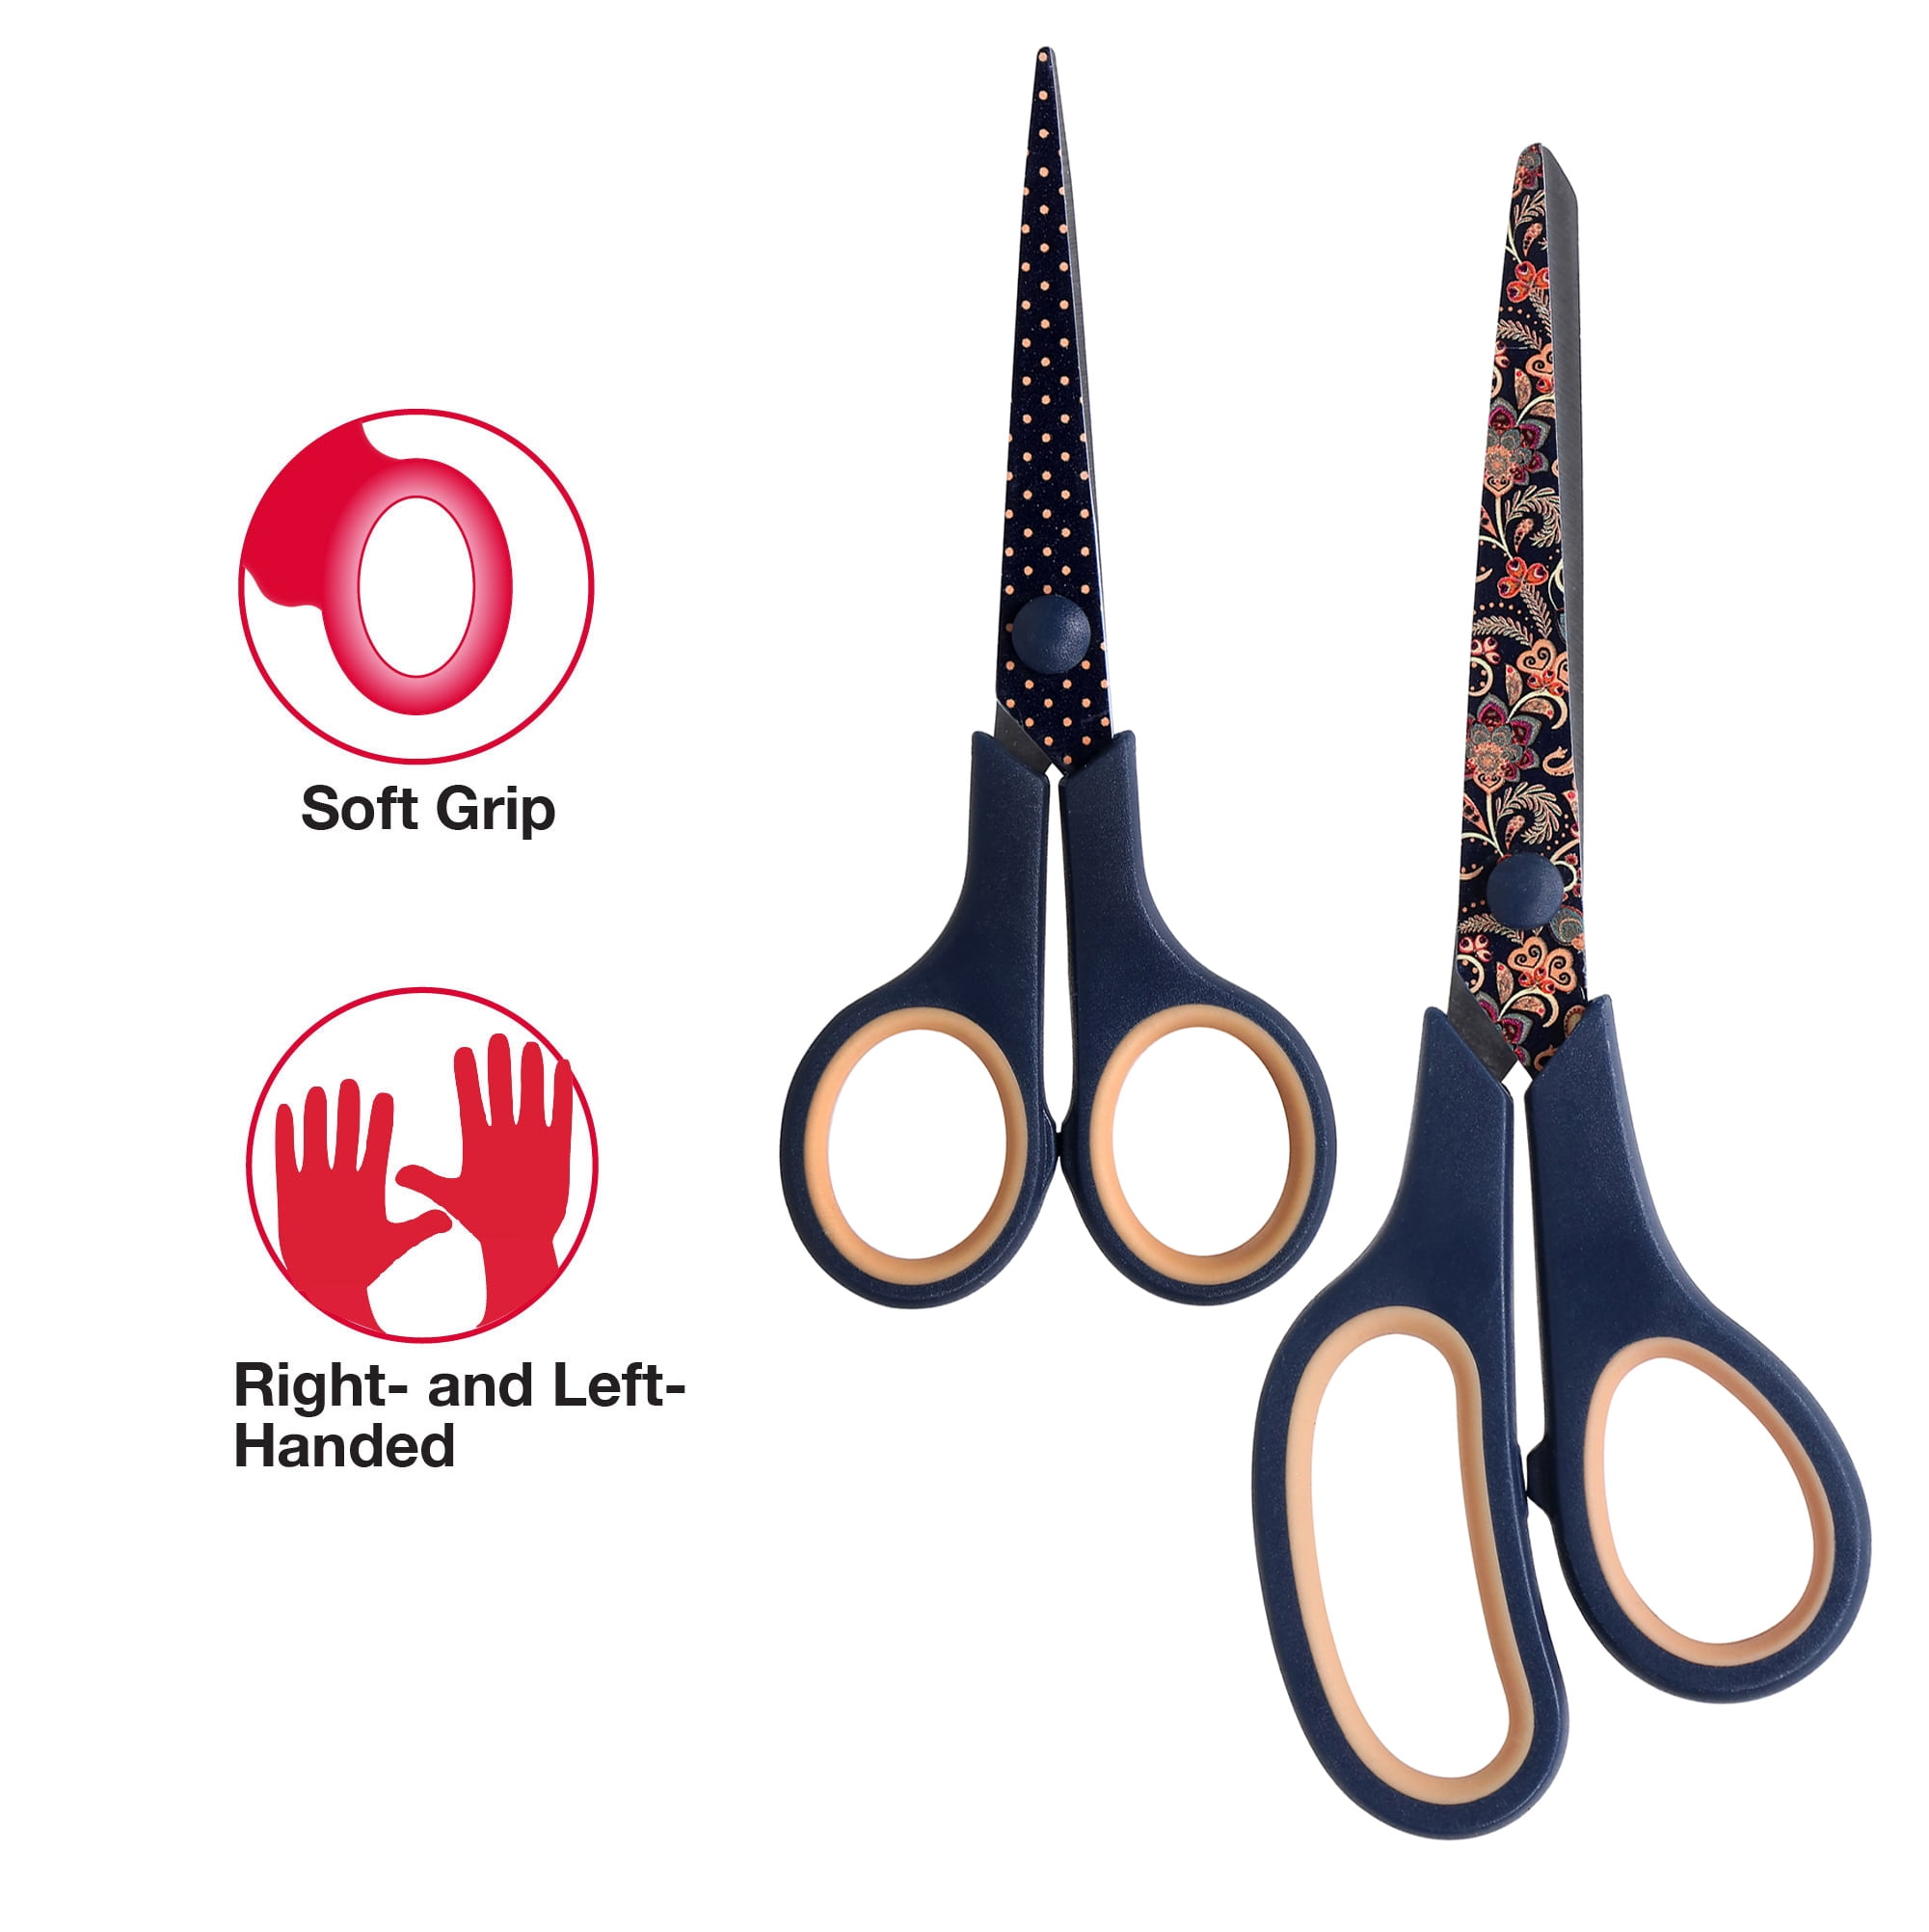 Singer Fabric Scissors With Rubberized Comfort Grip, 8.5-Inch 